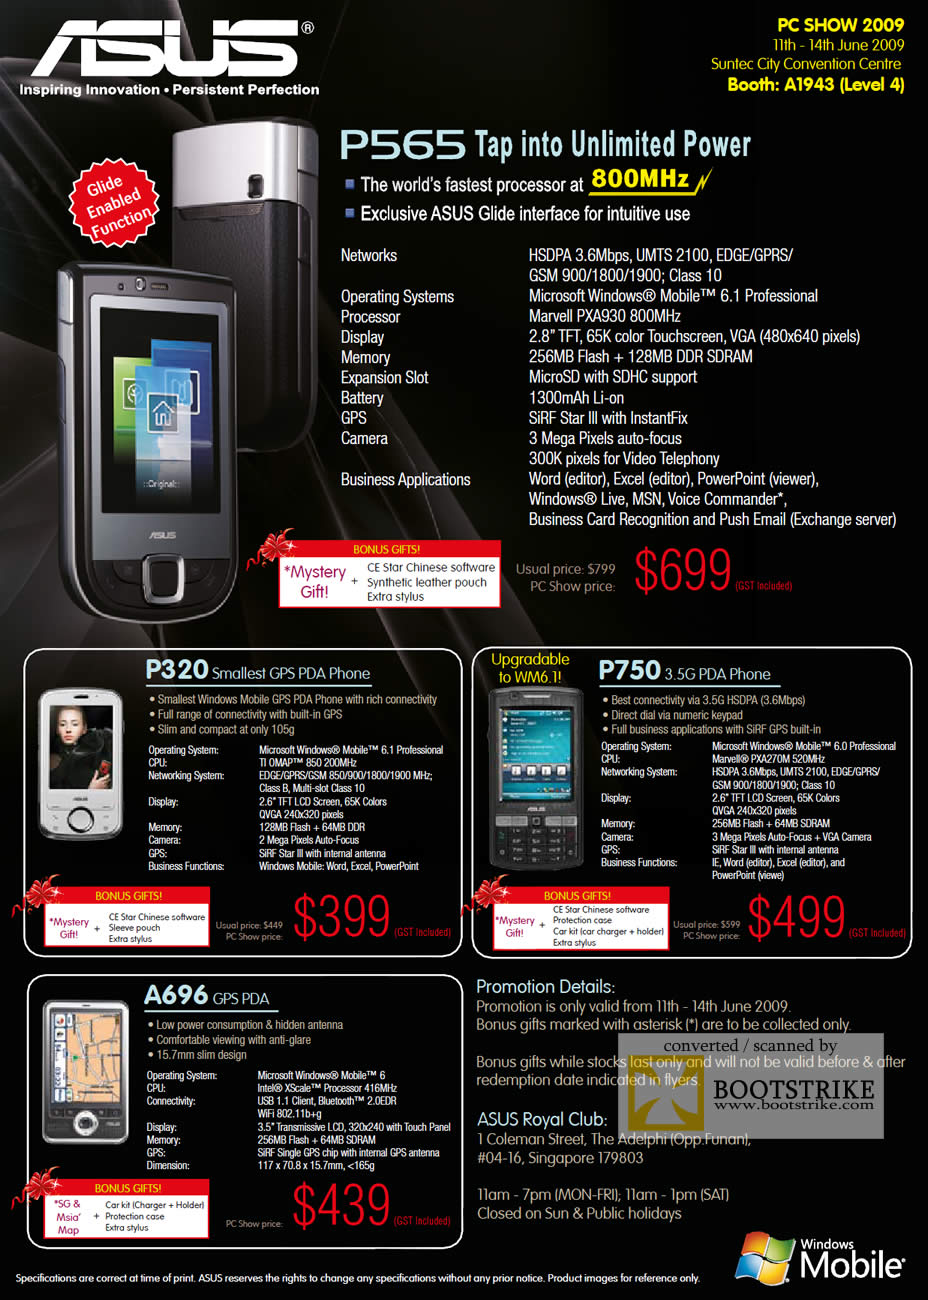 PC Show 2009 price list image brochure of Asus GPS PDA Phones P565 P320 P750 A696